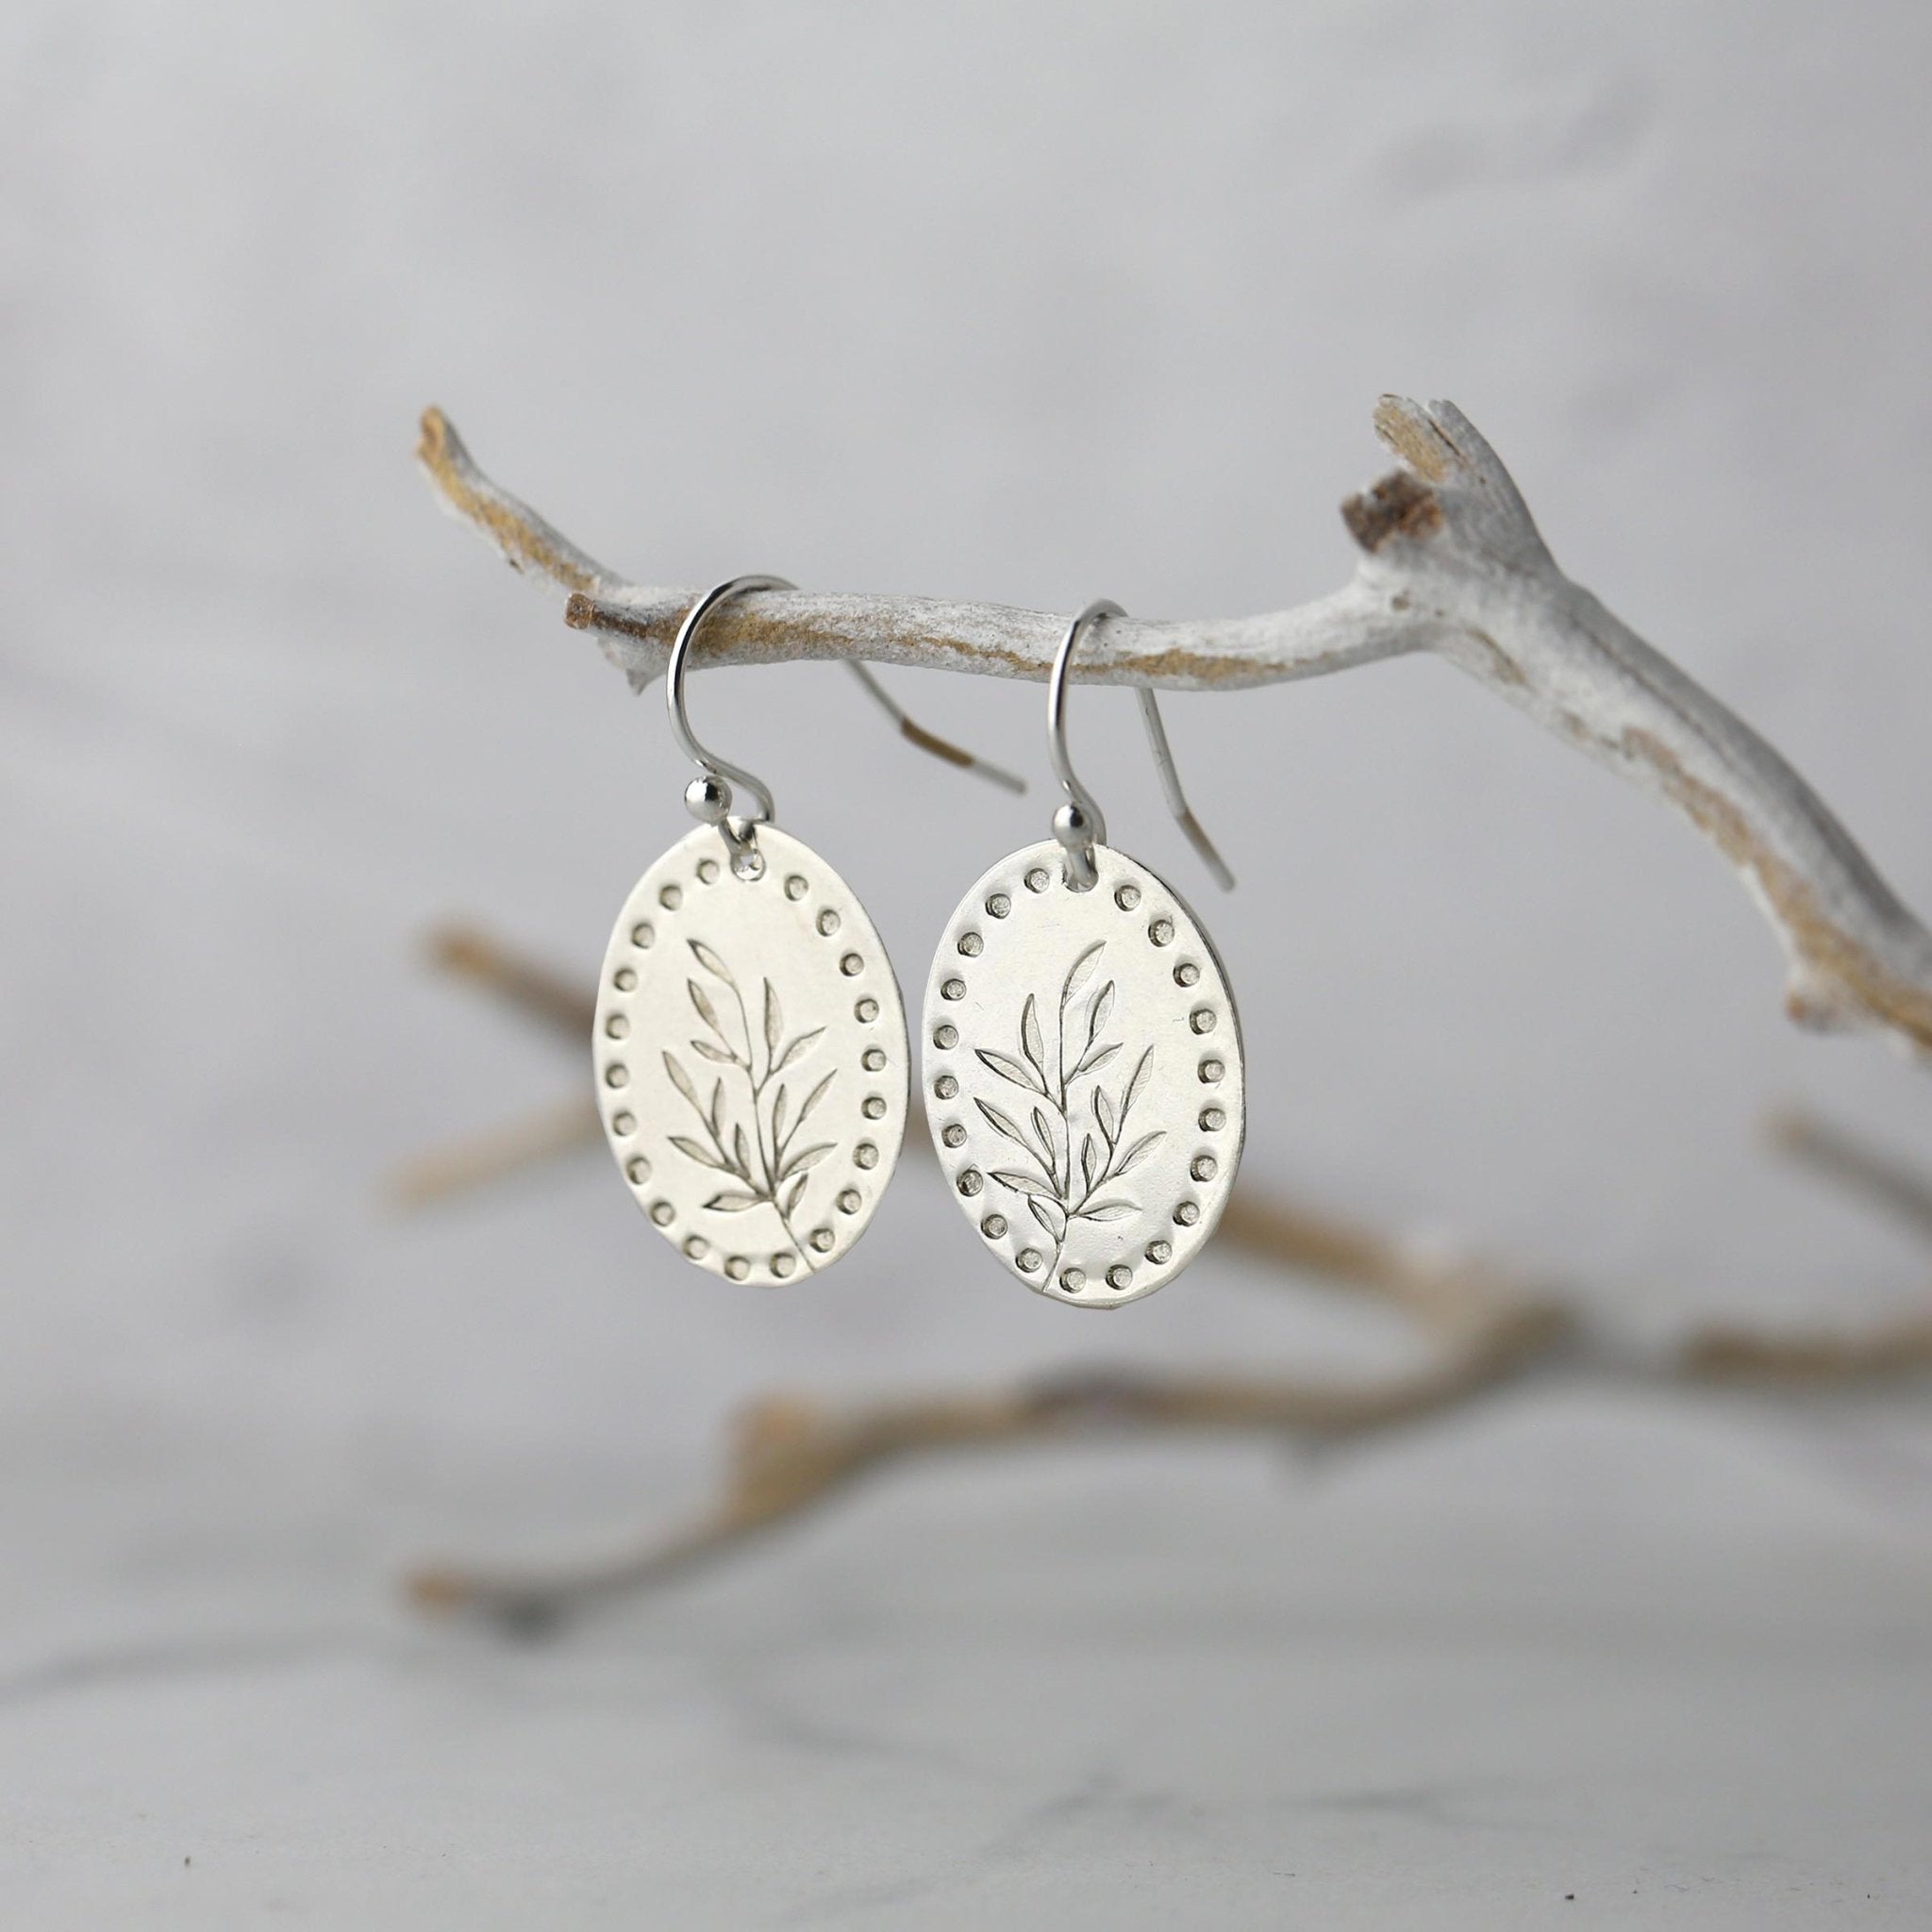 Silver Oval Stamped Leaf Earrings handmade by Burnish